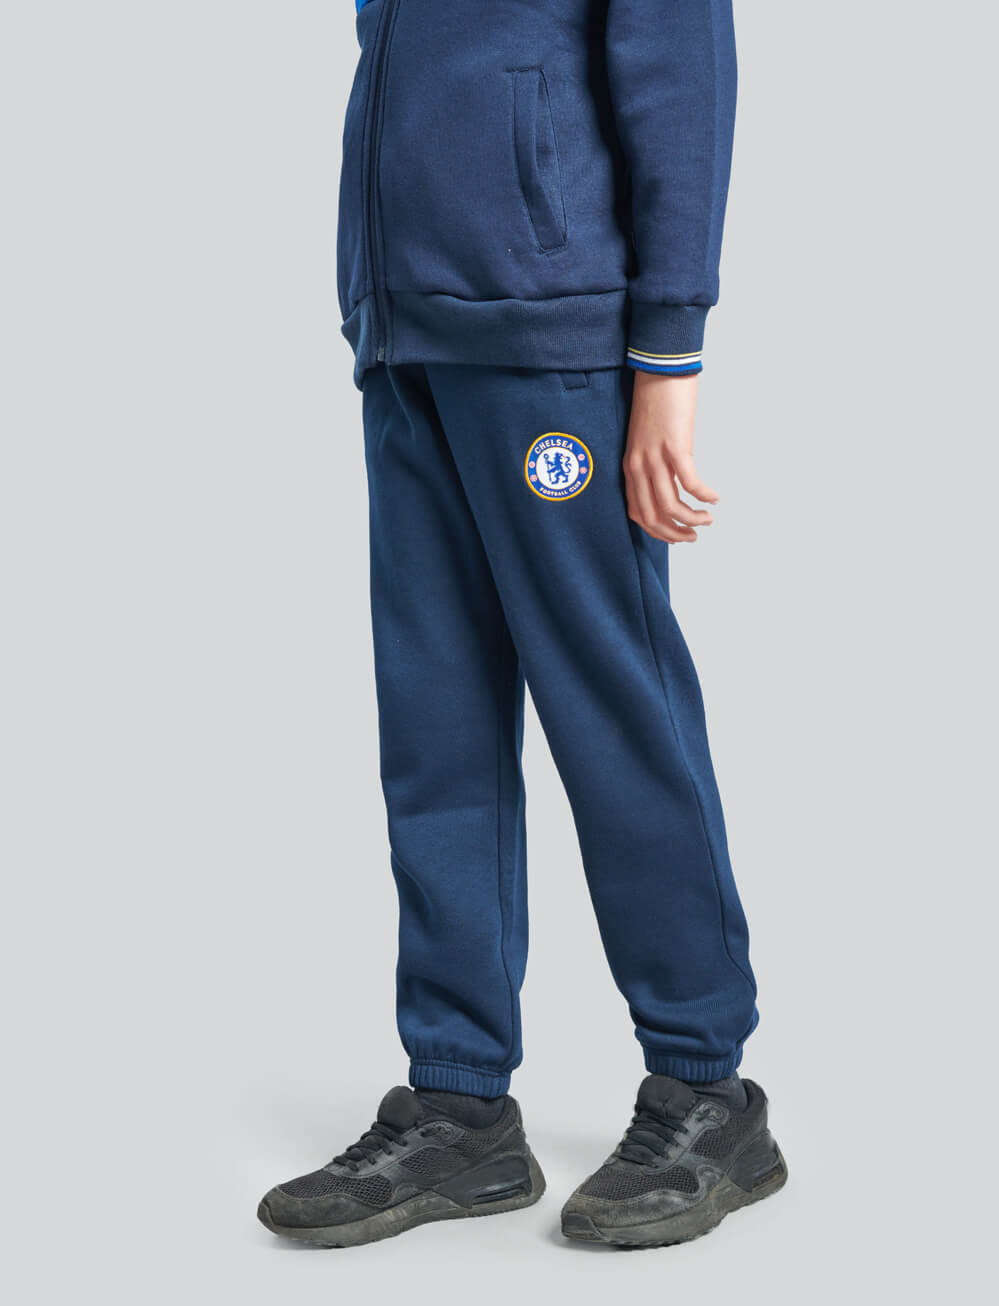 Official Chelsea Kids Joggers - Navy - The World Football Store